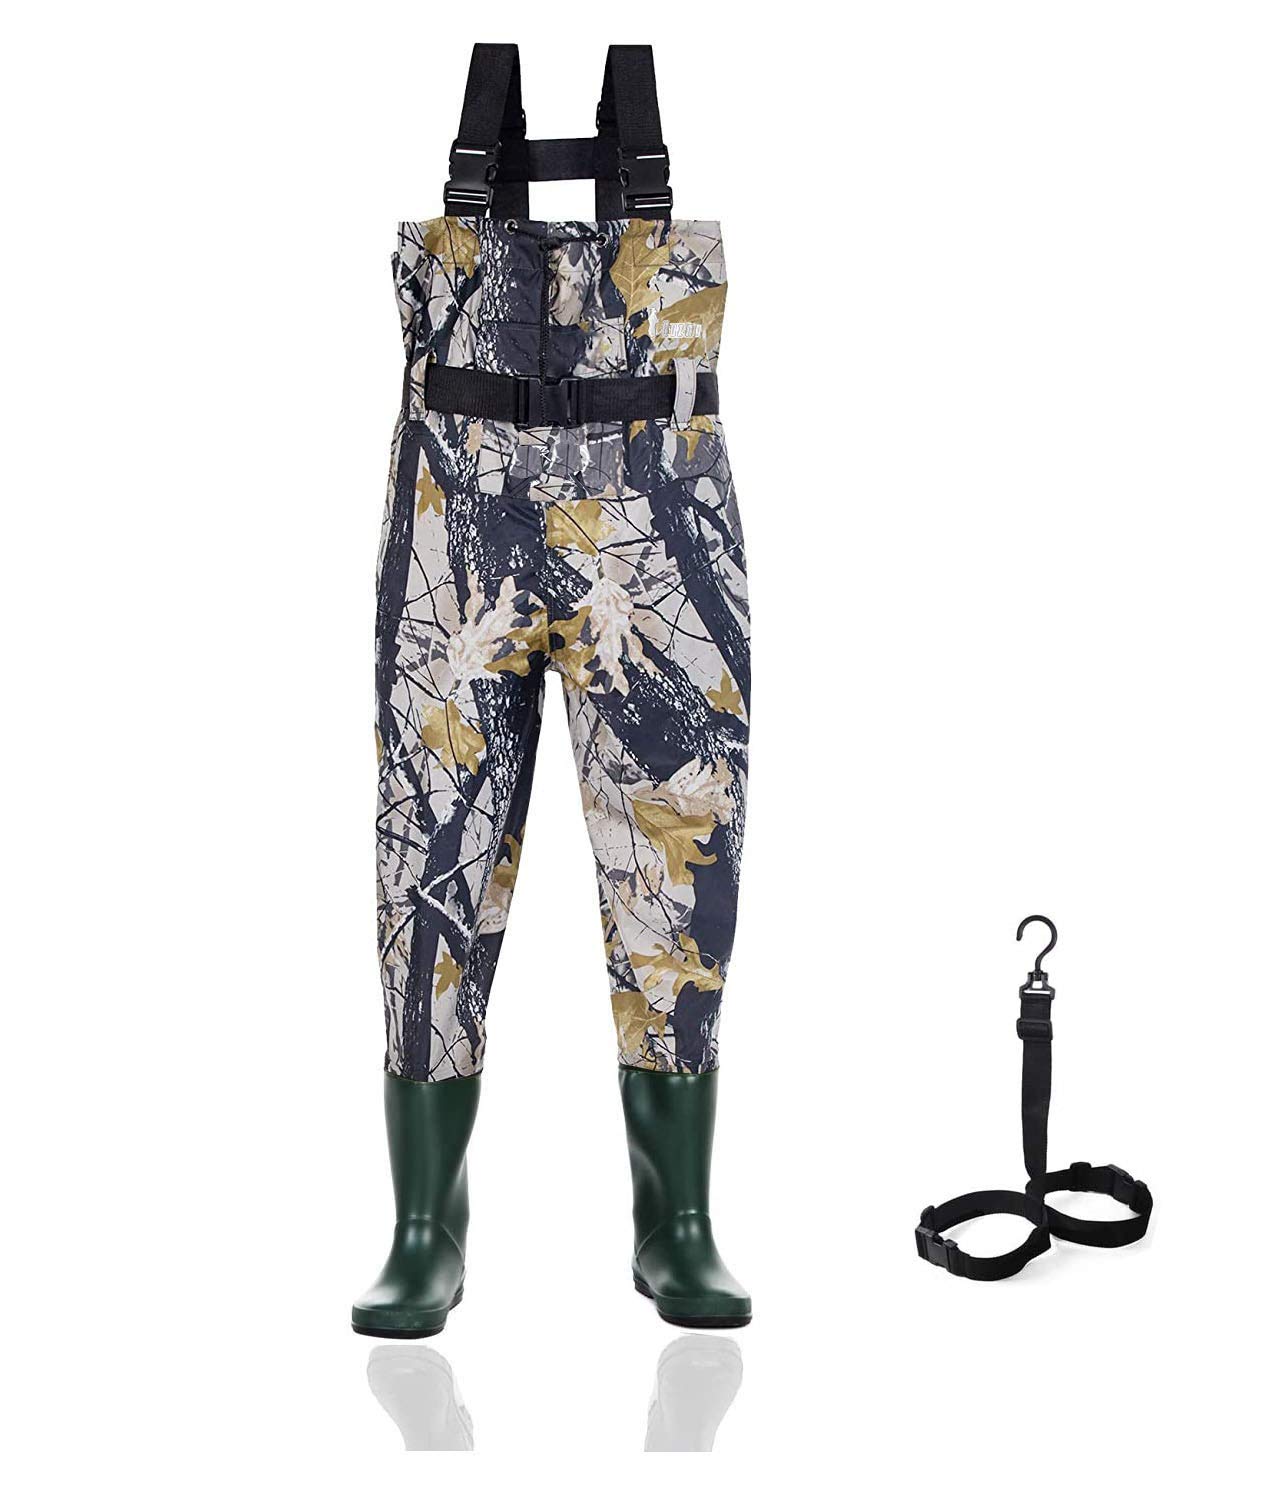 Kids Boy Girls Chest Wader Waterproof Trousers Boots Fishing Outdoor  Camouflage